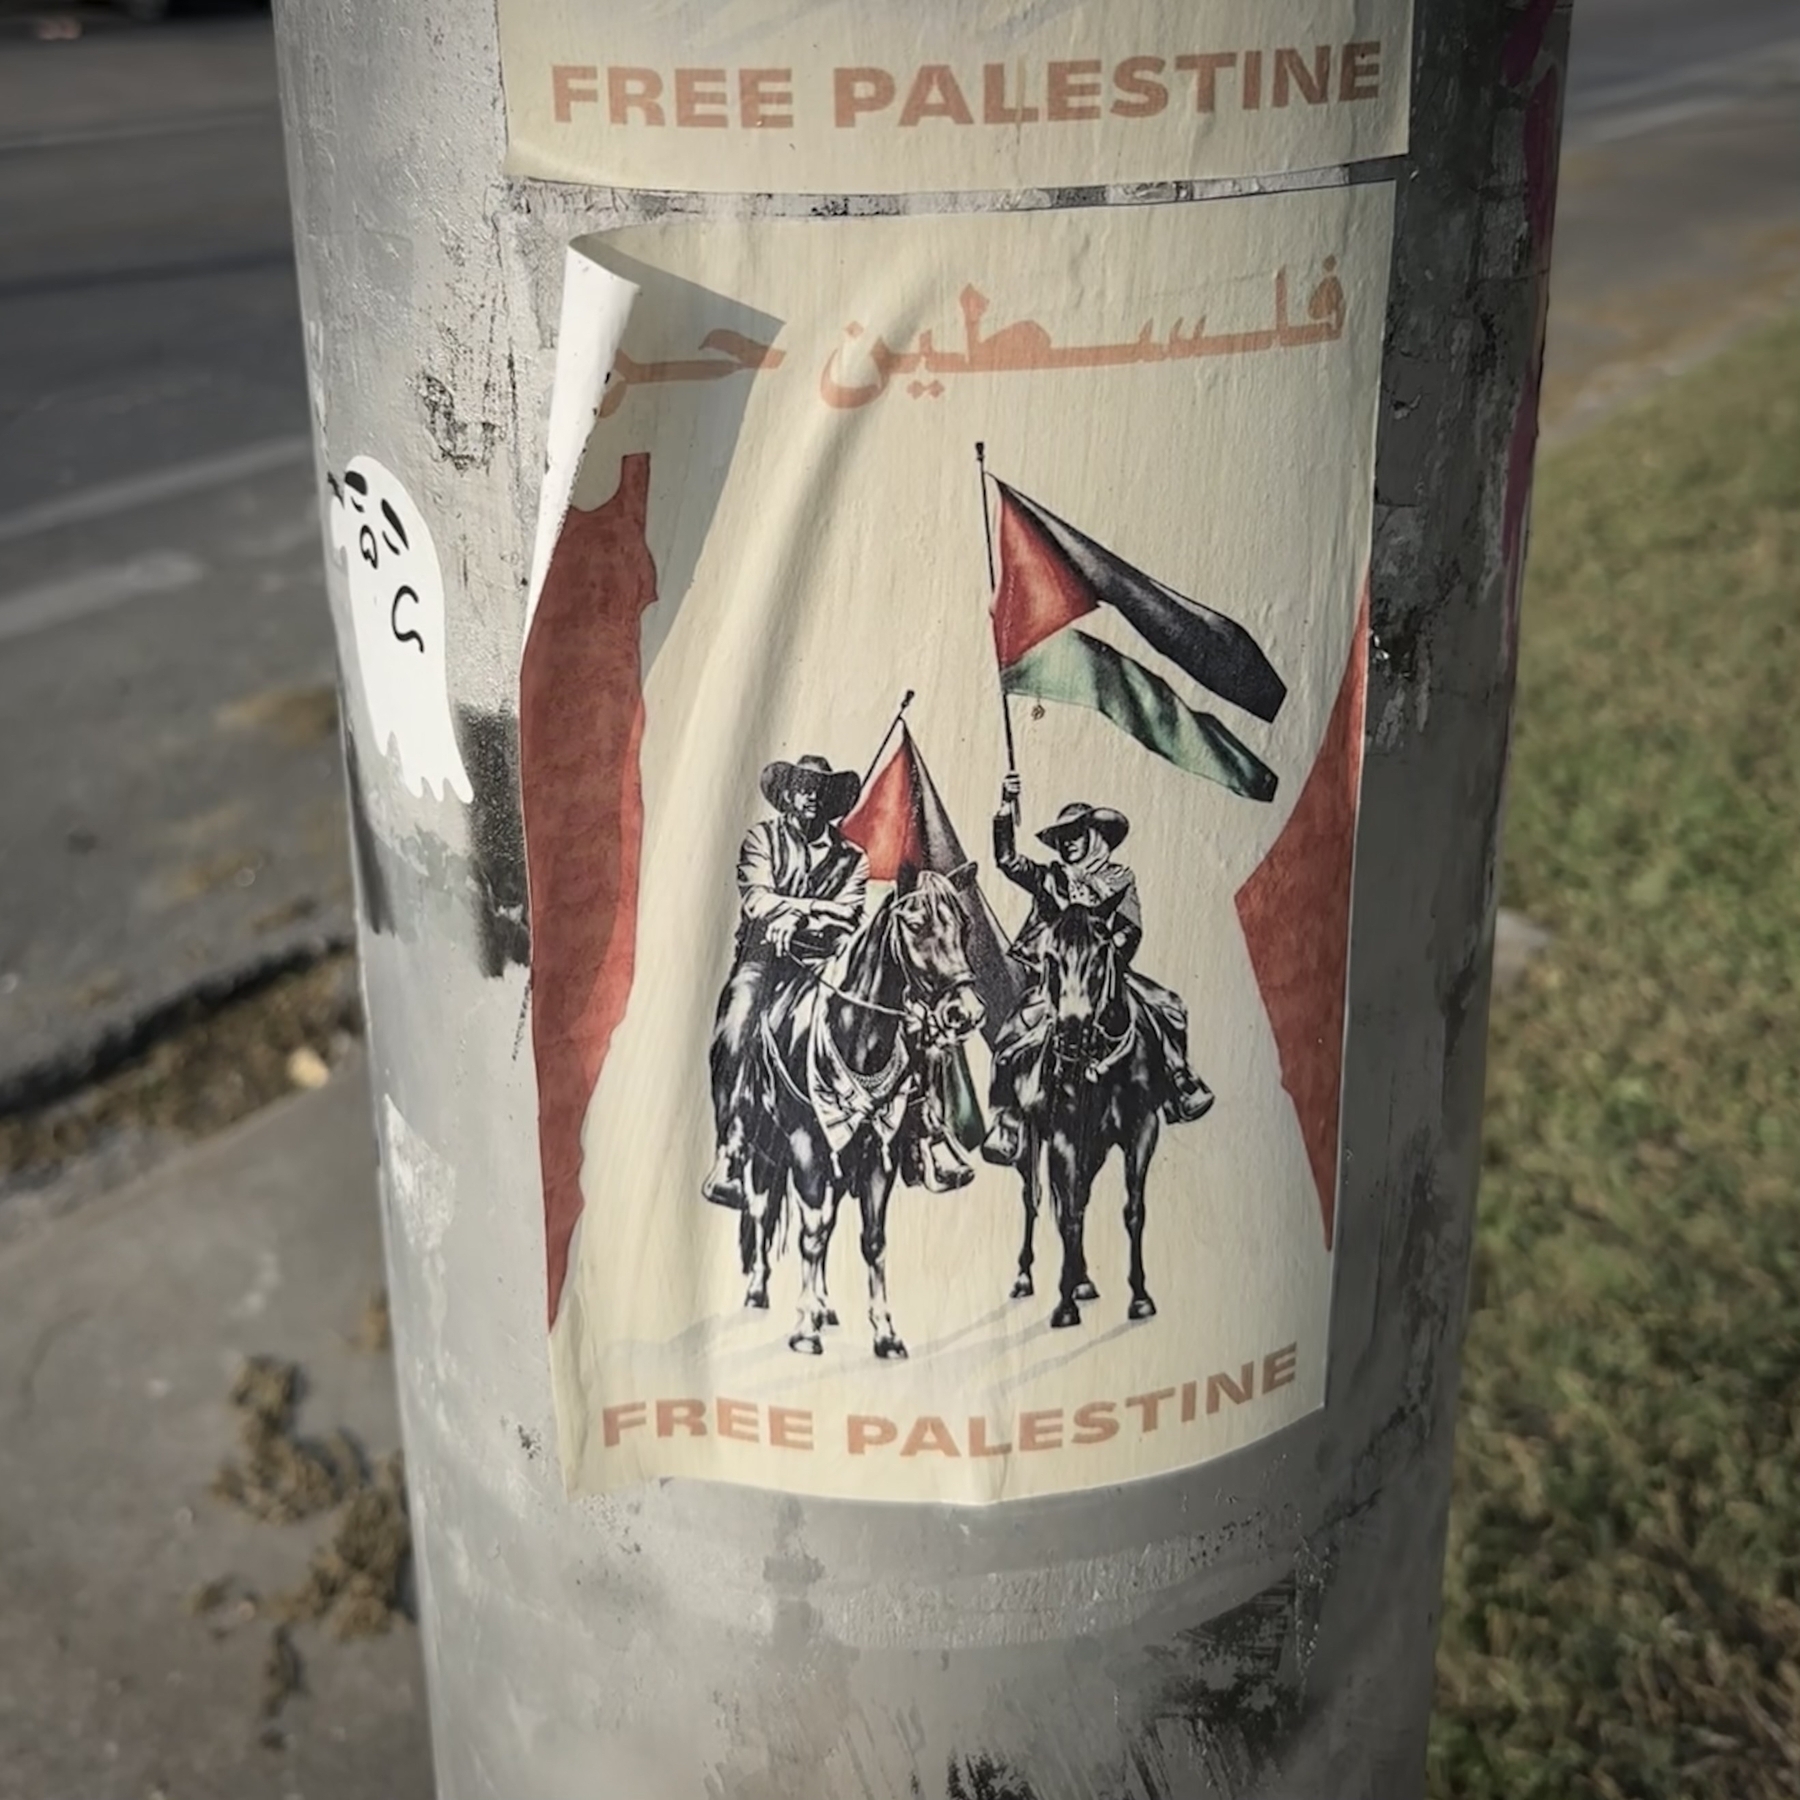 A weathered poster on a pole depicts figures on horseback, the Palestinian flag, and the text Free Palestine.